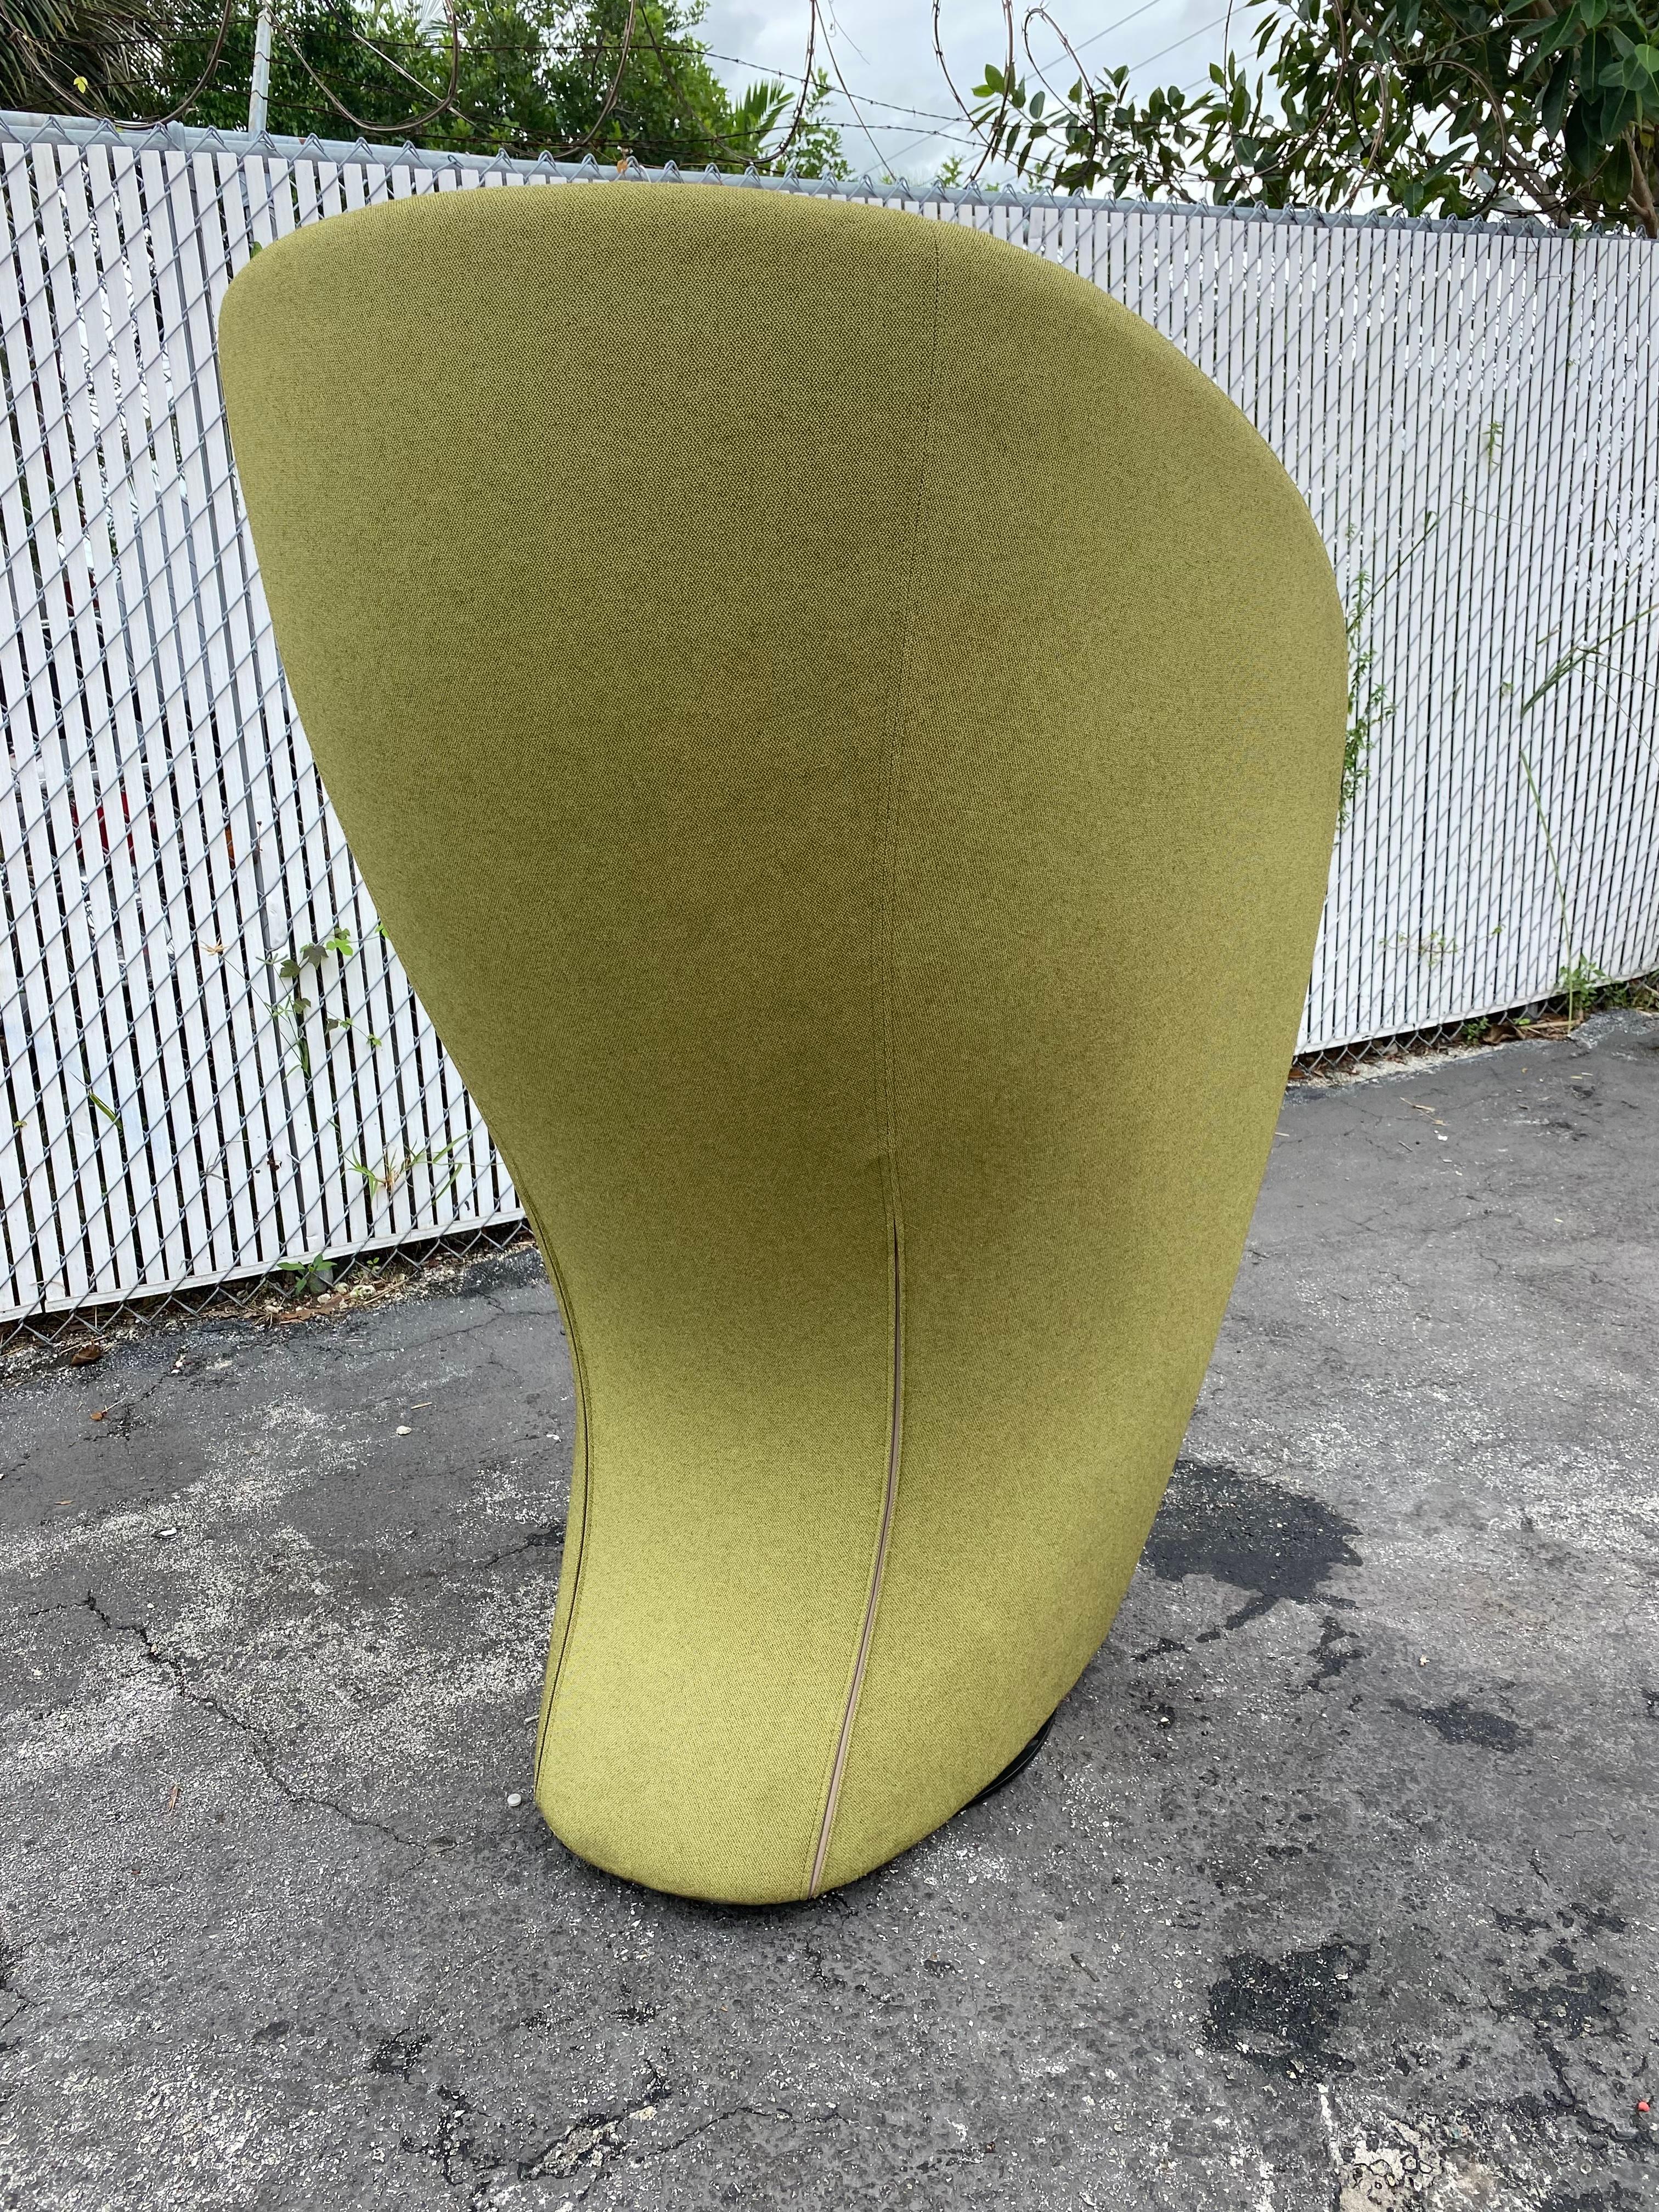 Monumental Hightower Shelter Sculptural Swivel Chair In Good Condition For Sale In Fort Lauderdale, FL